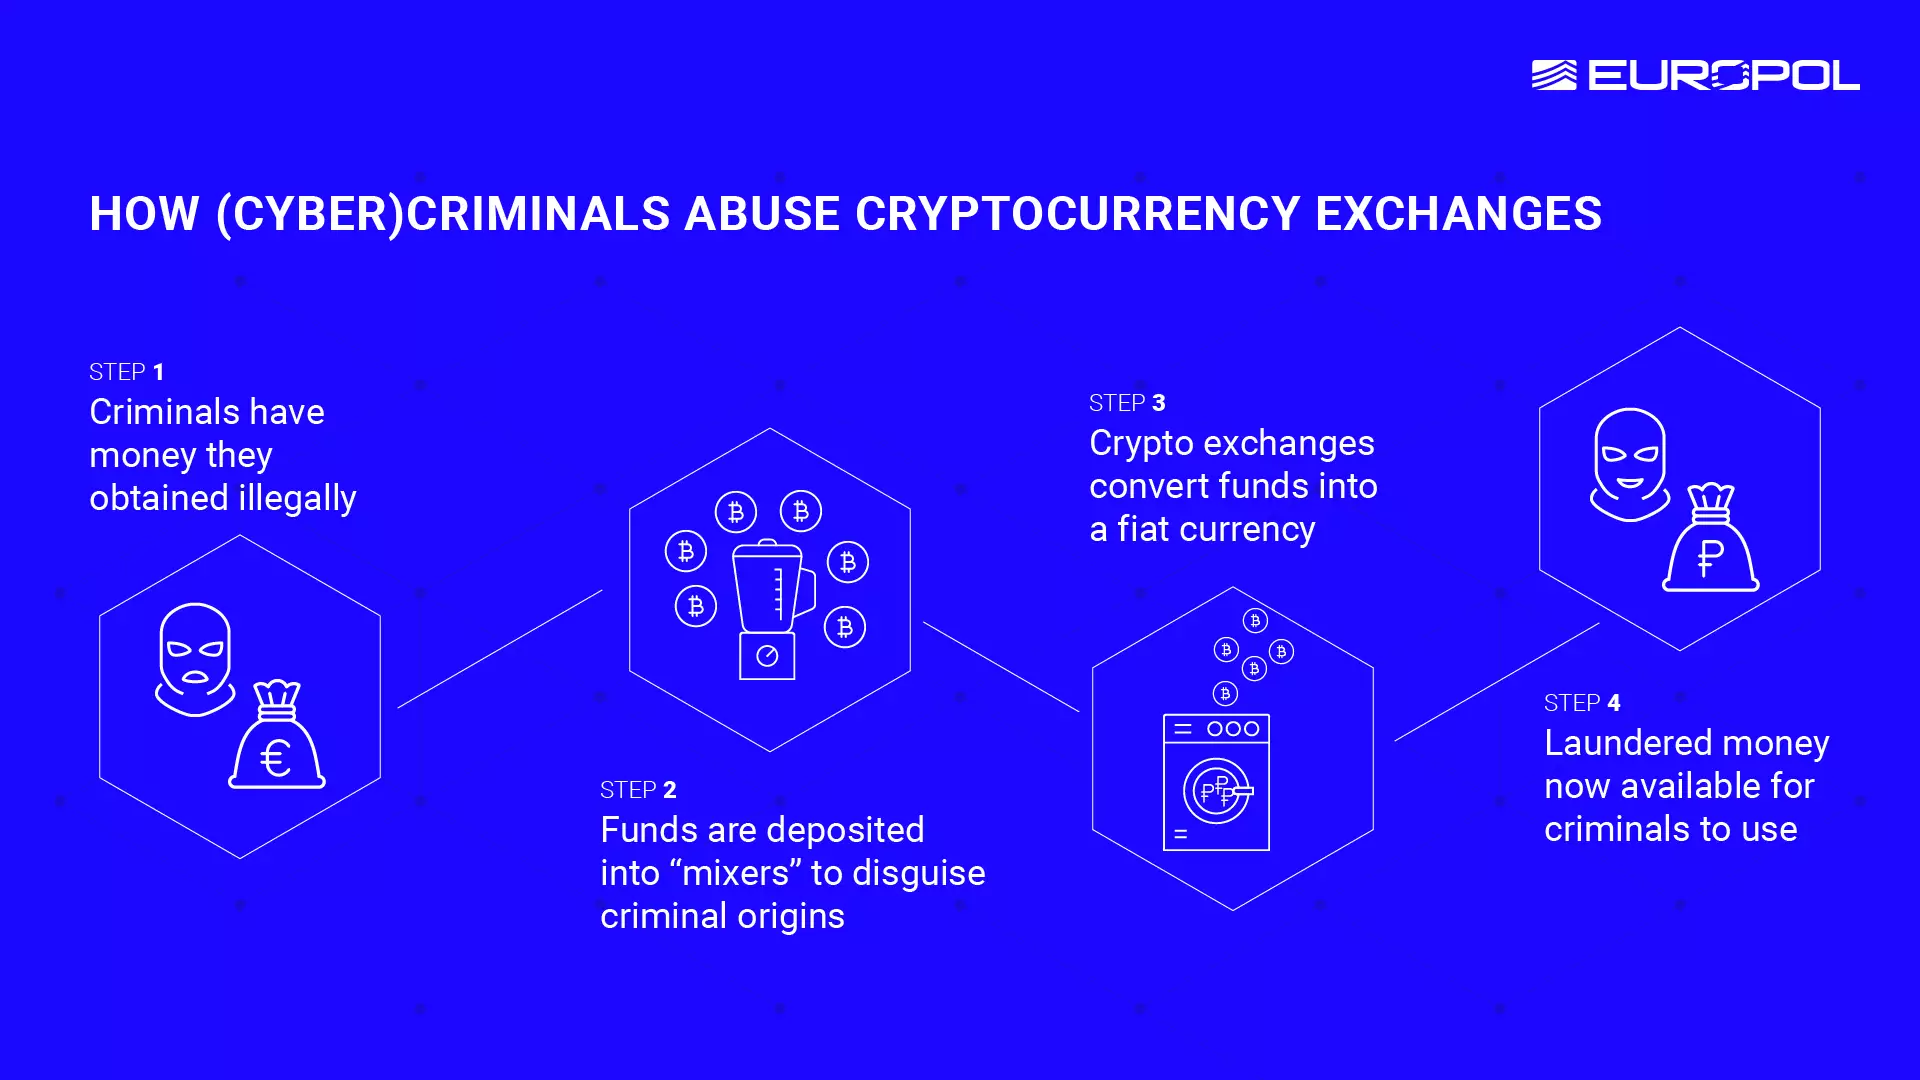 How cyber-criminals abuse cryptocurrency exchanges.